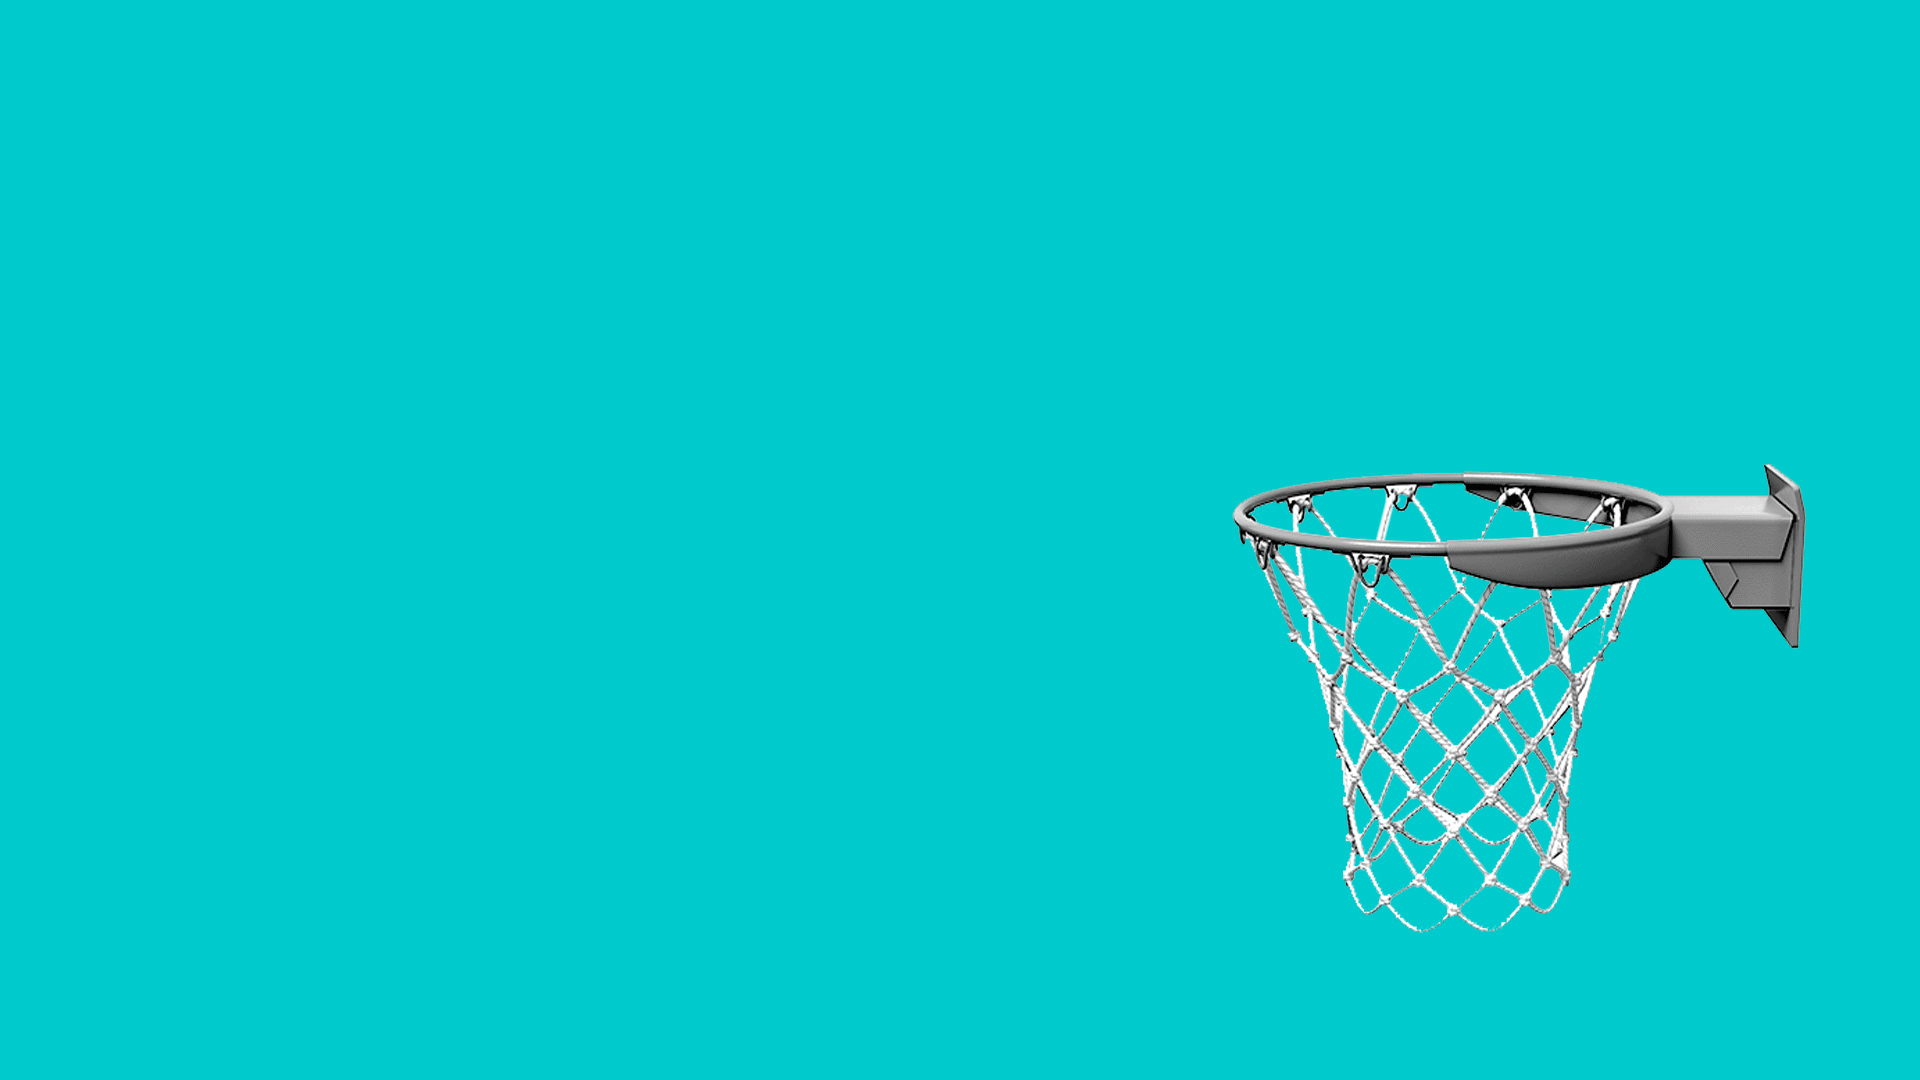 Animated illustration of a star going through a basketball net.